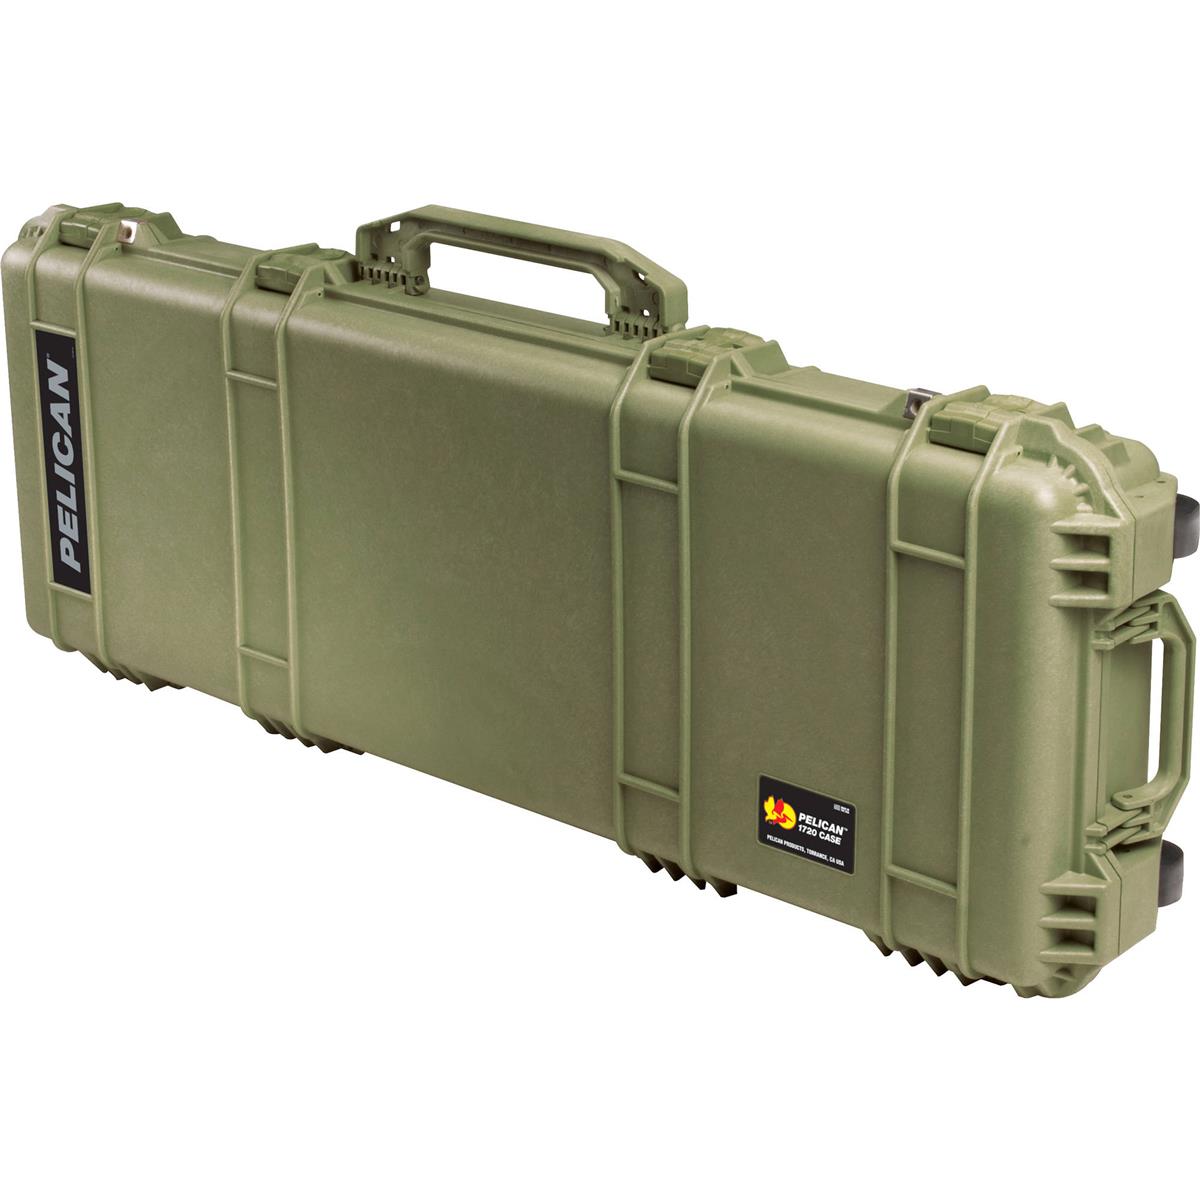 Image of Pelican 1720 Travel Vault Wheeled Weapons Case with Foam Insert